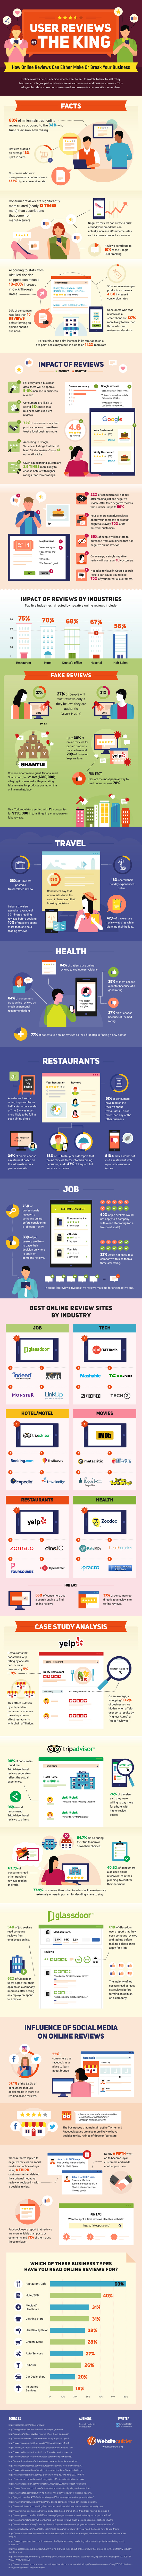 Online Reviews 2017 Infographic